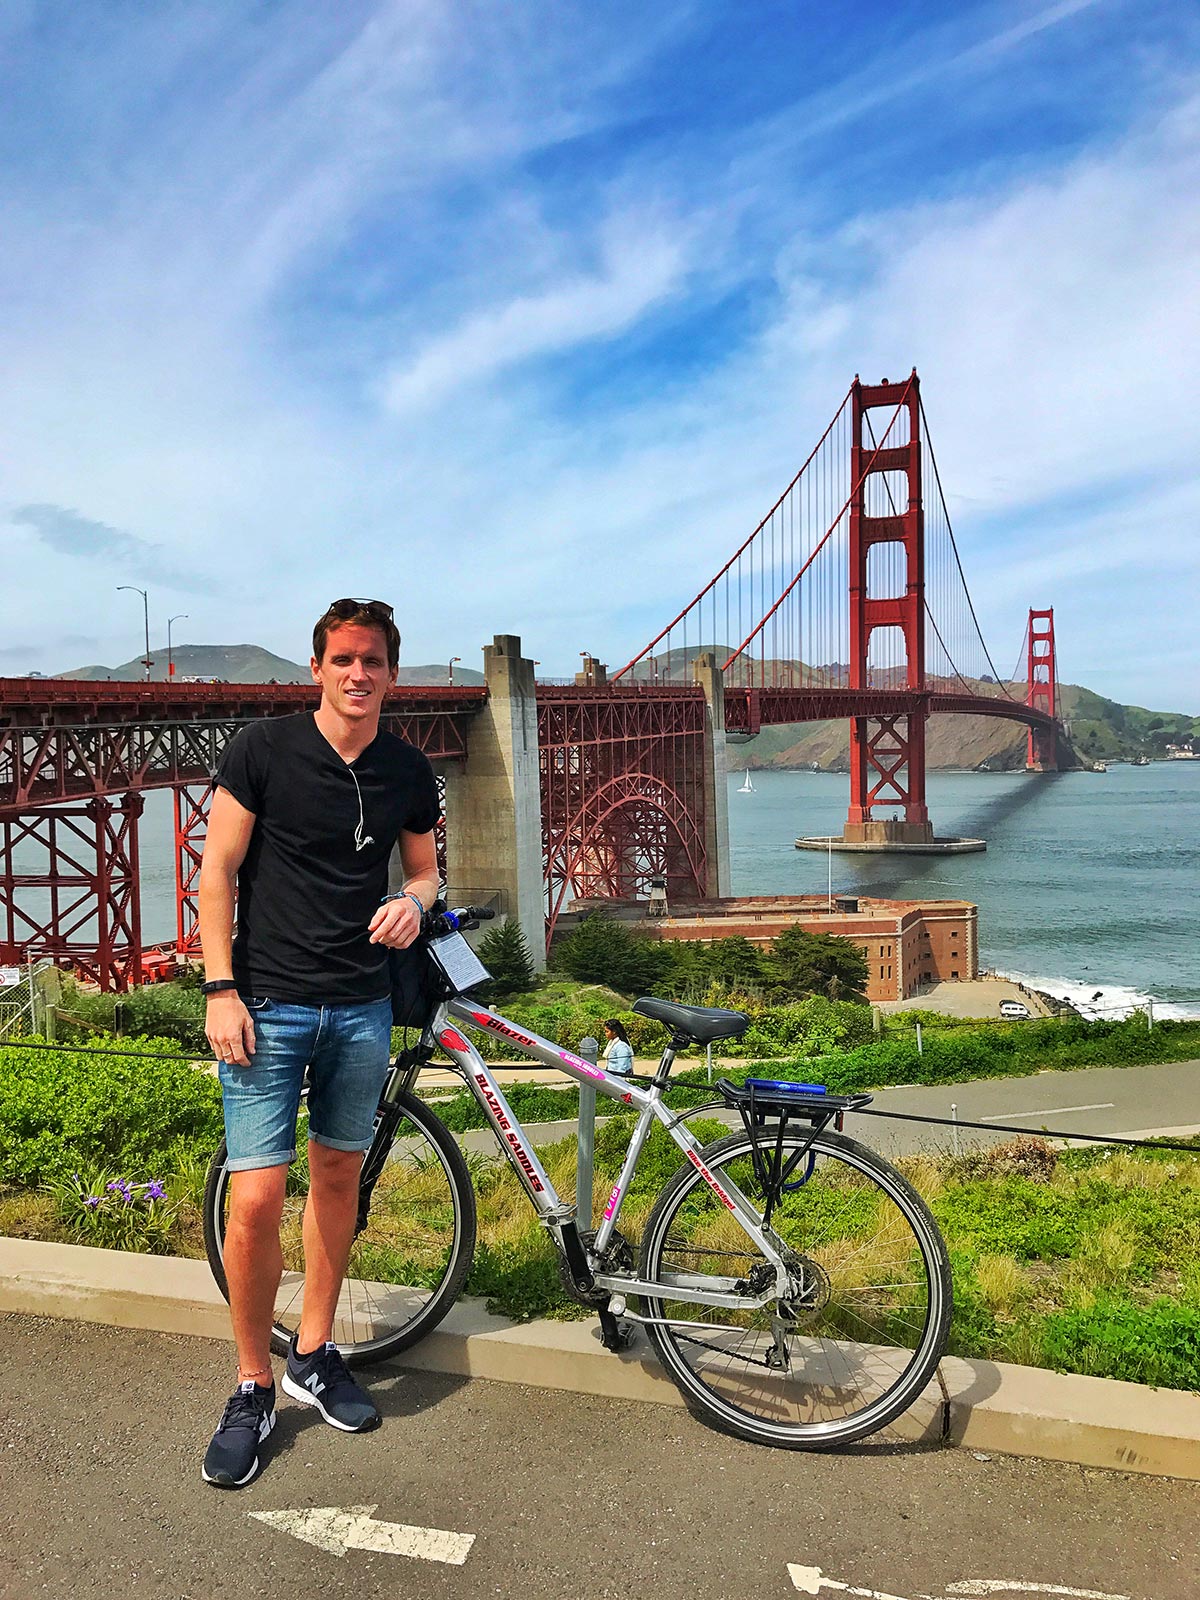 David Simpson with his bike and the Golden Gate Bridge in San Francisco, USA. L.A. & San Fran, revisiting the West Coast